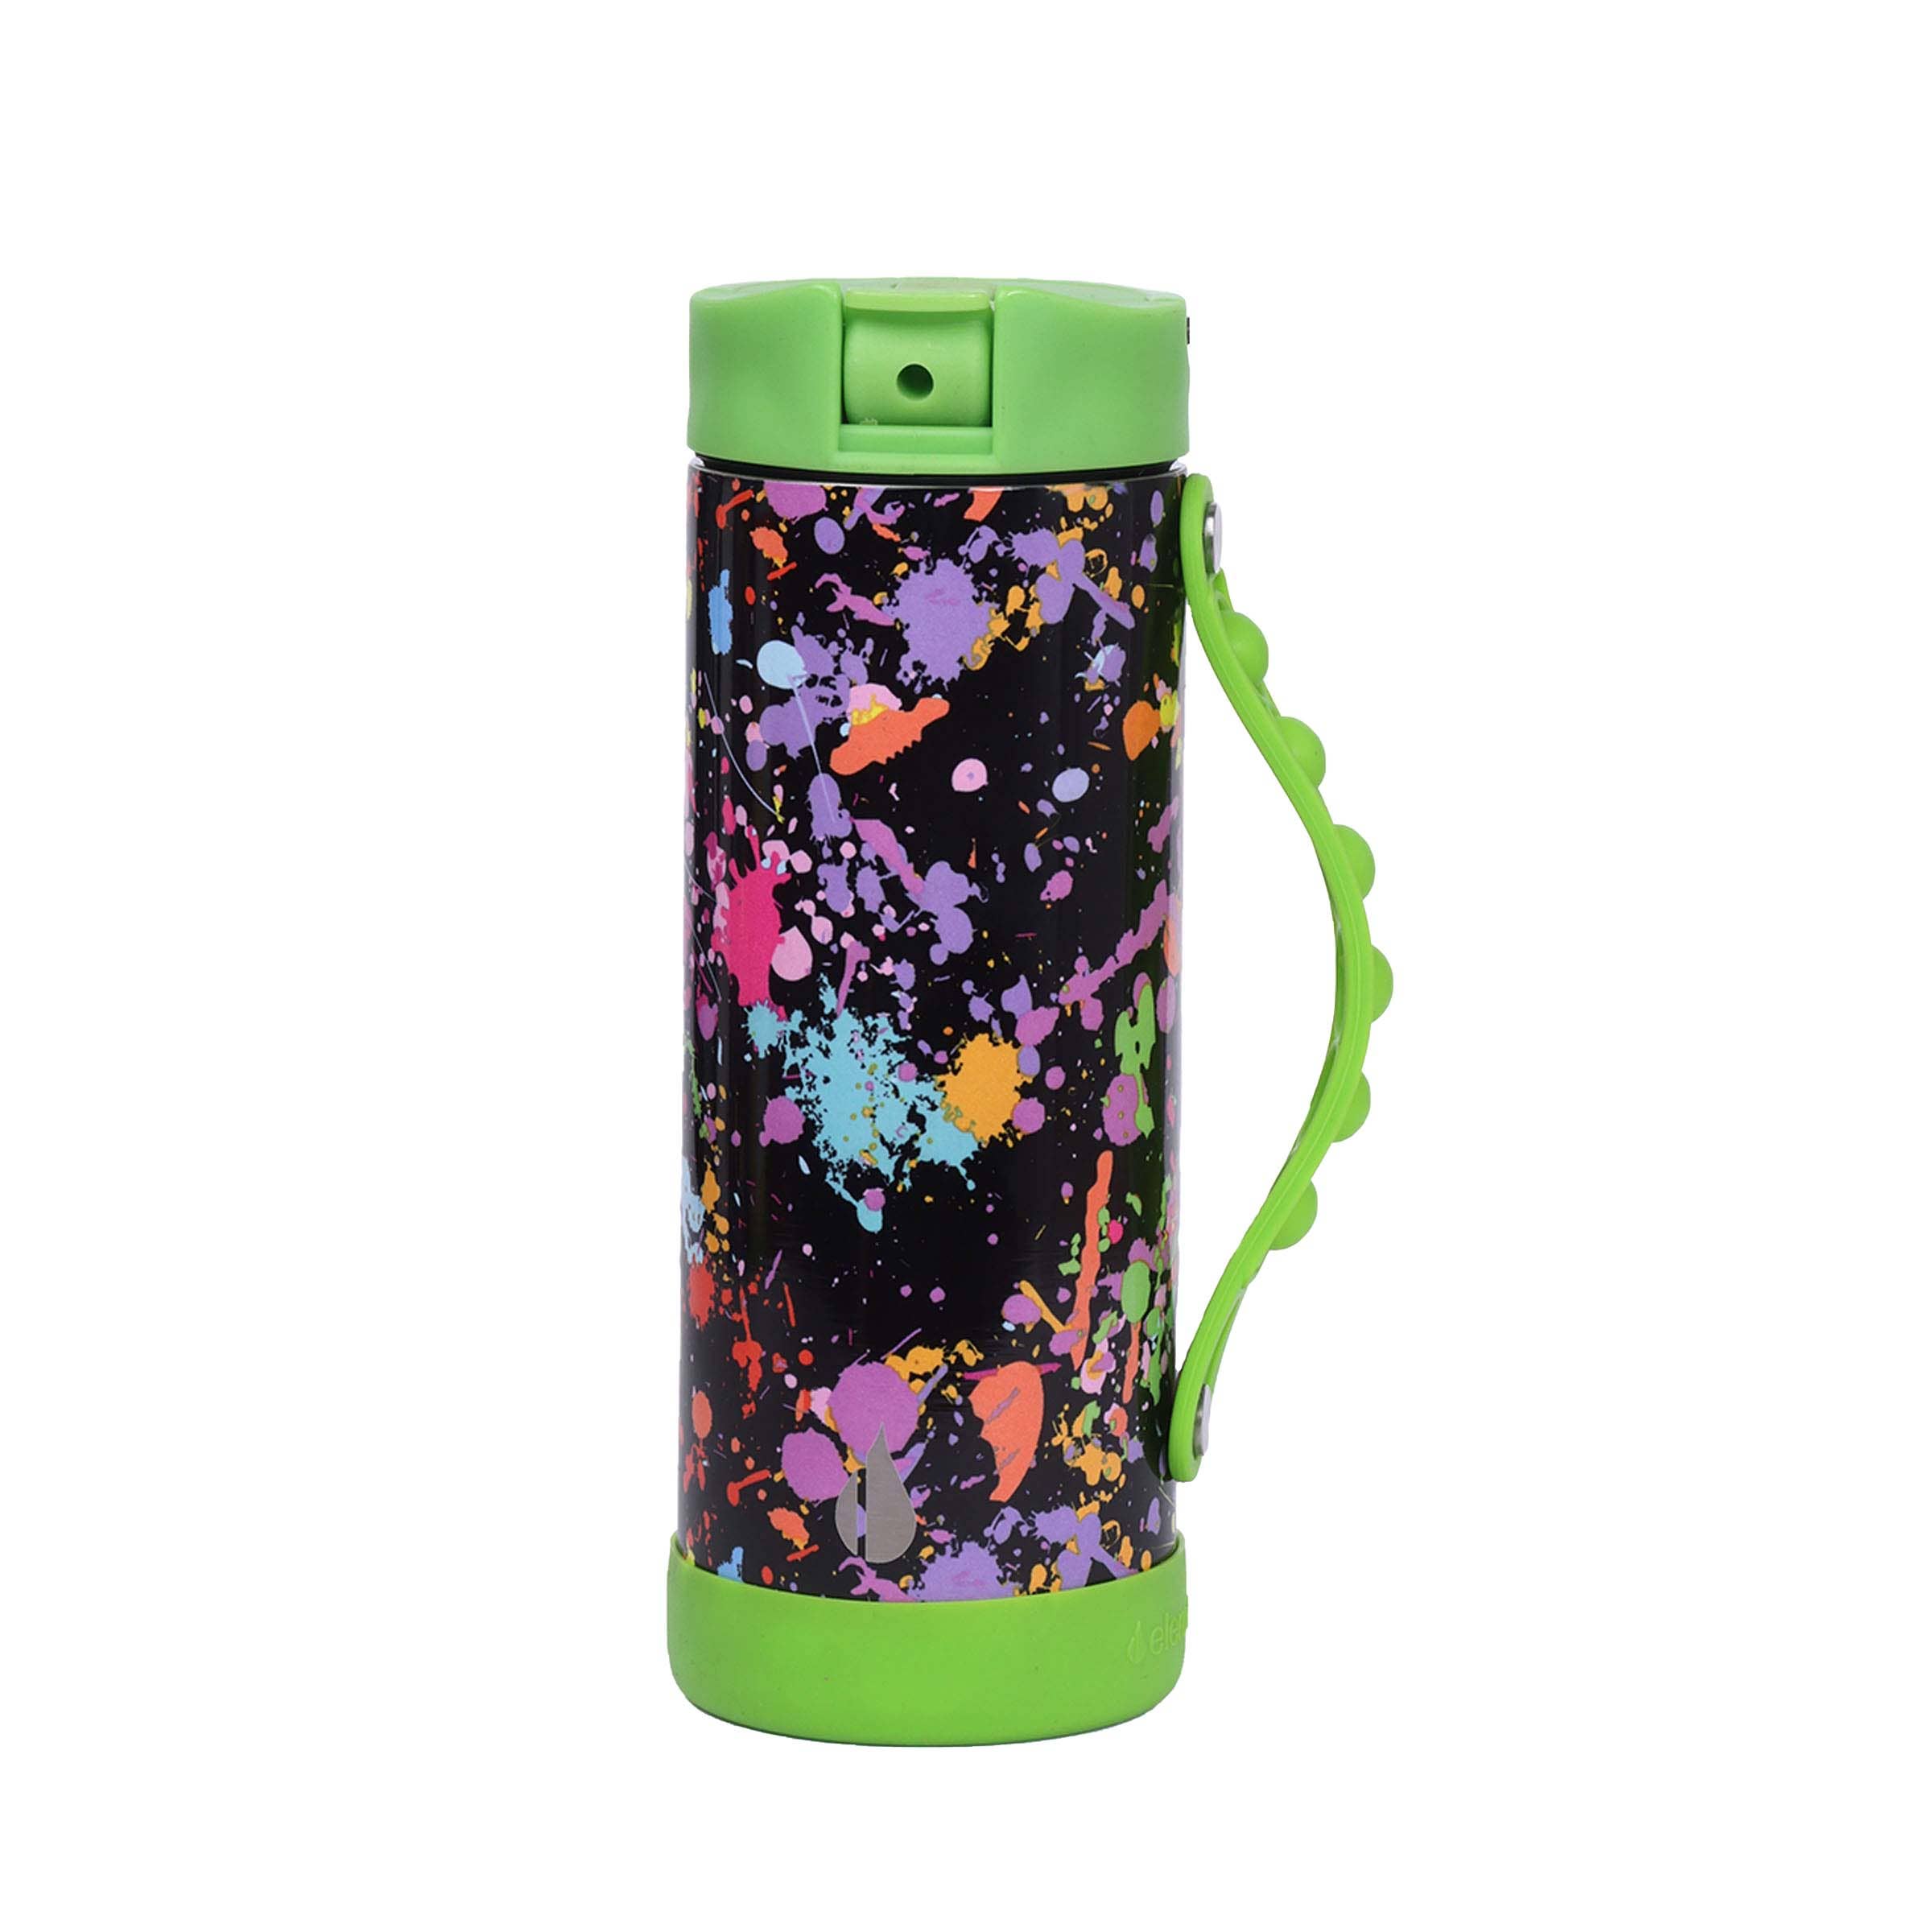 The Iconic Pop Bottle with Green Paint Splatter.